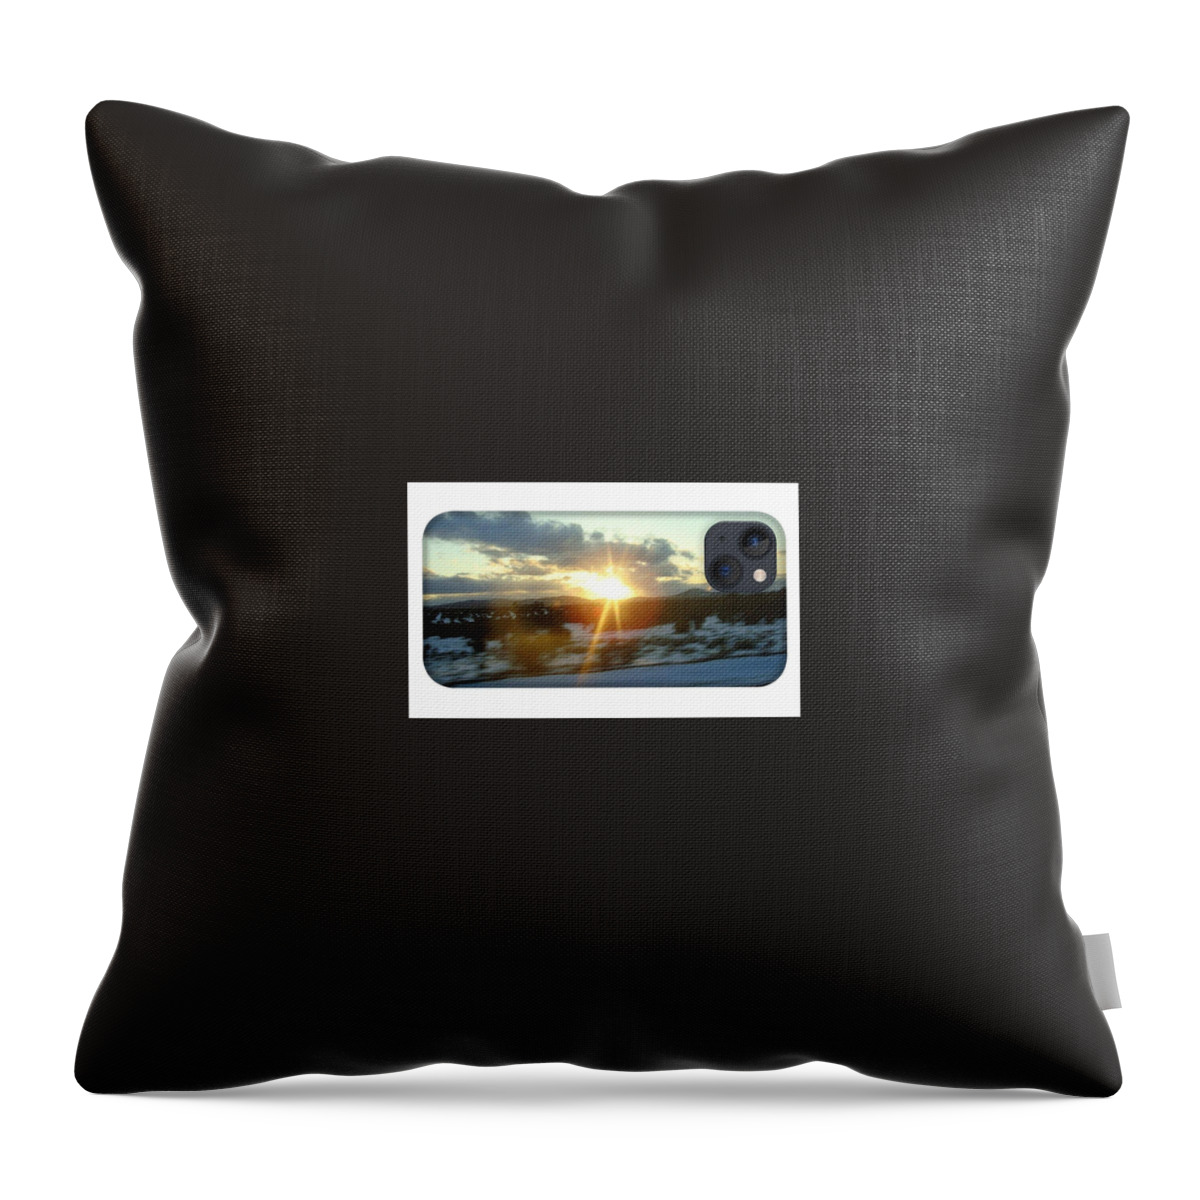  Throw Pillow featuring the photograph Sosobone Original 3 by Trevor A Smith